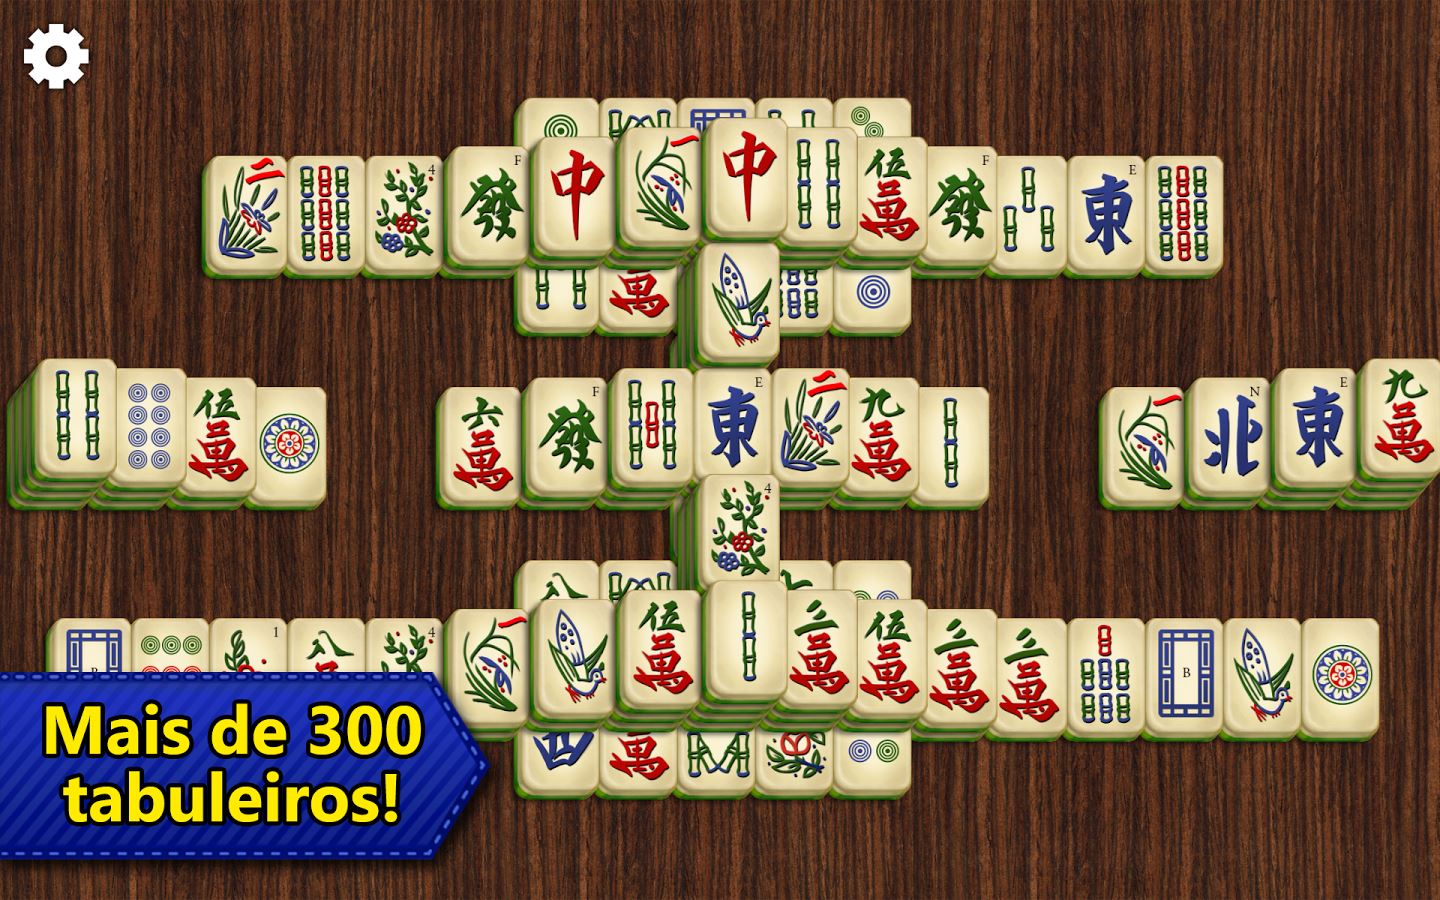 does majong solitaire epic have the standard board